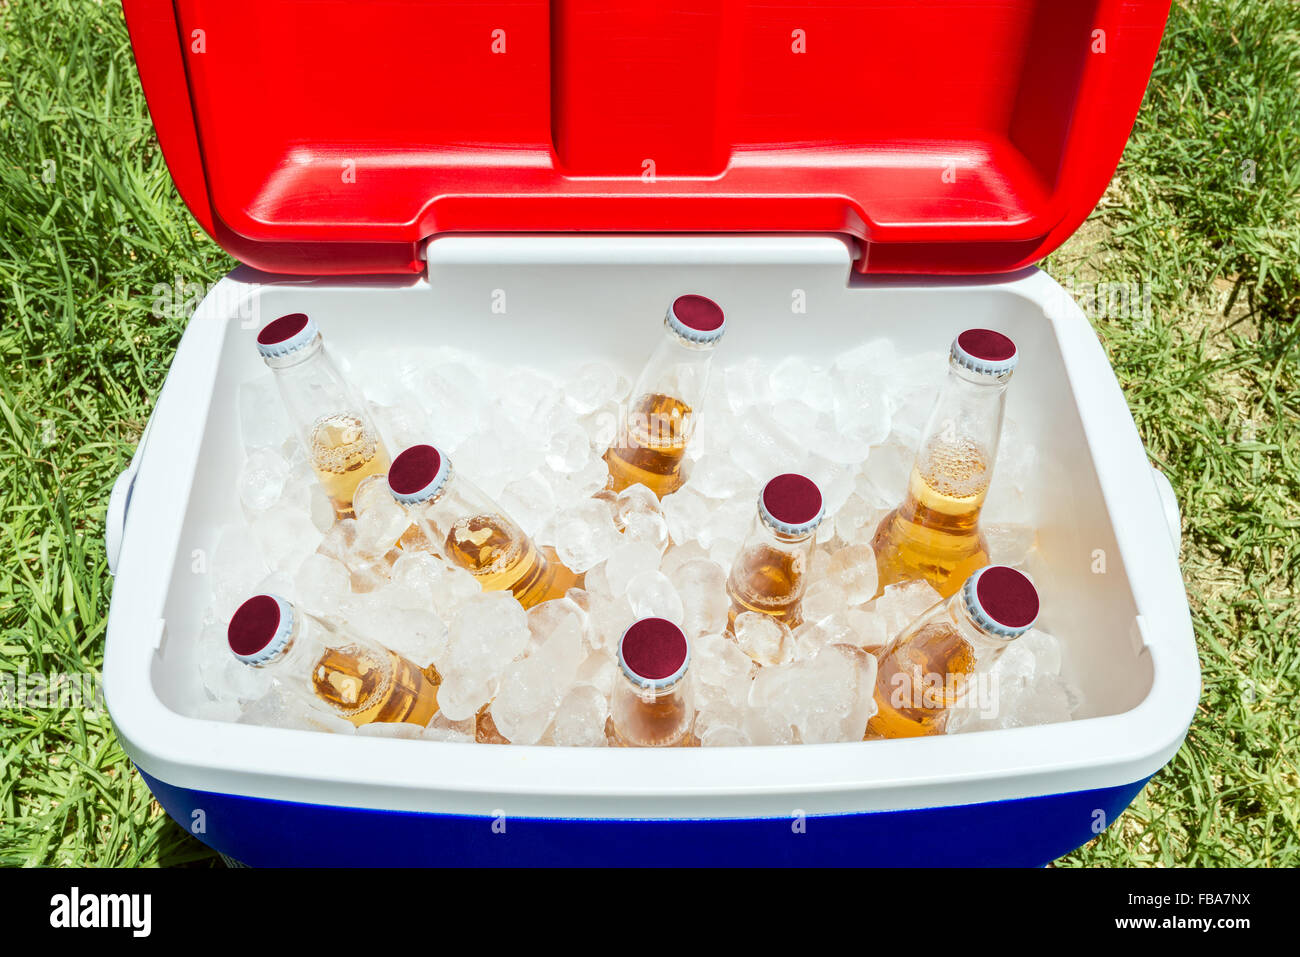 Picnic cooler box with bottles of beer and ice on grass during Australia Day celebration Stock Photo